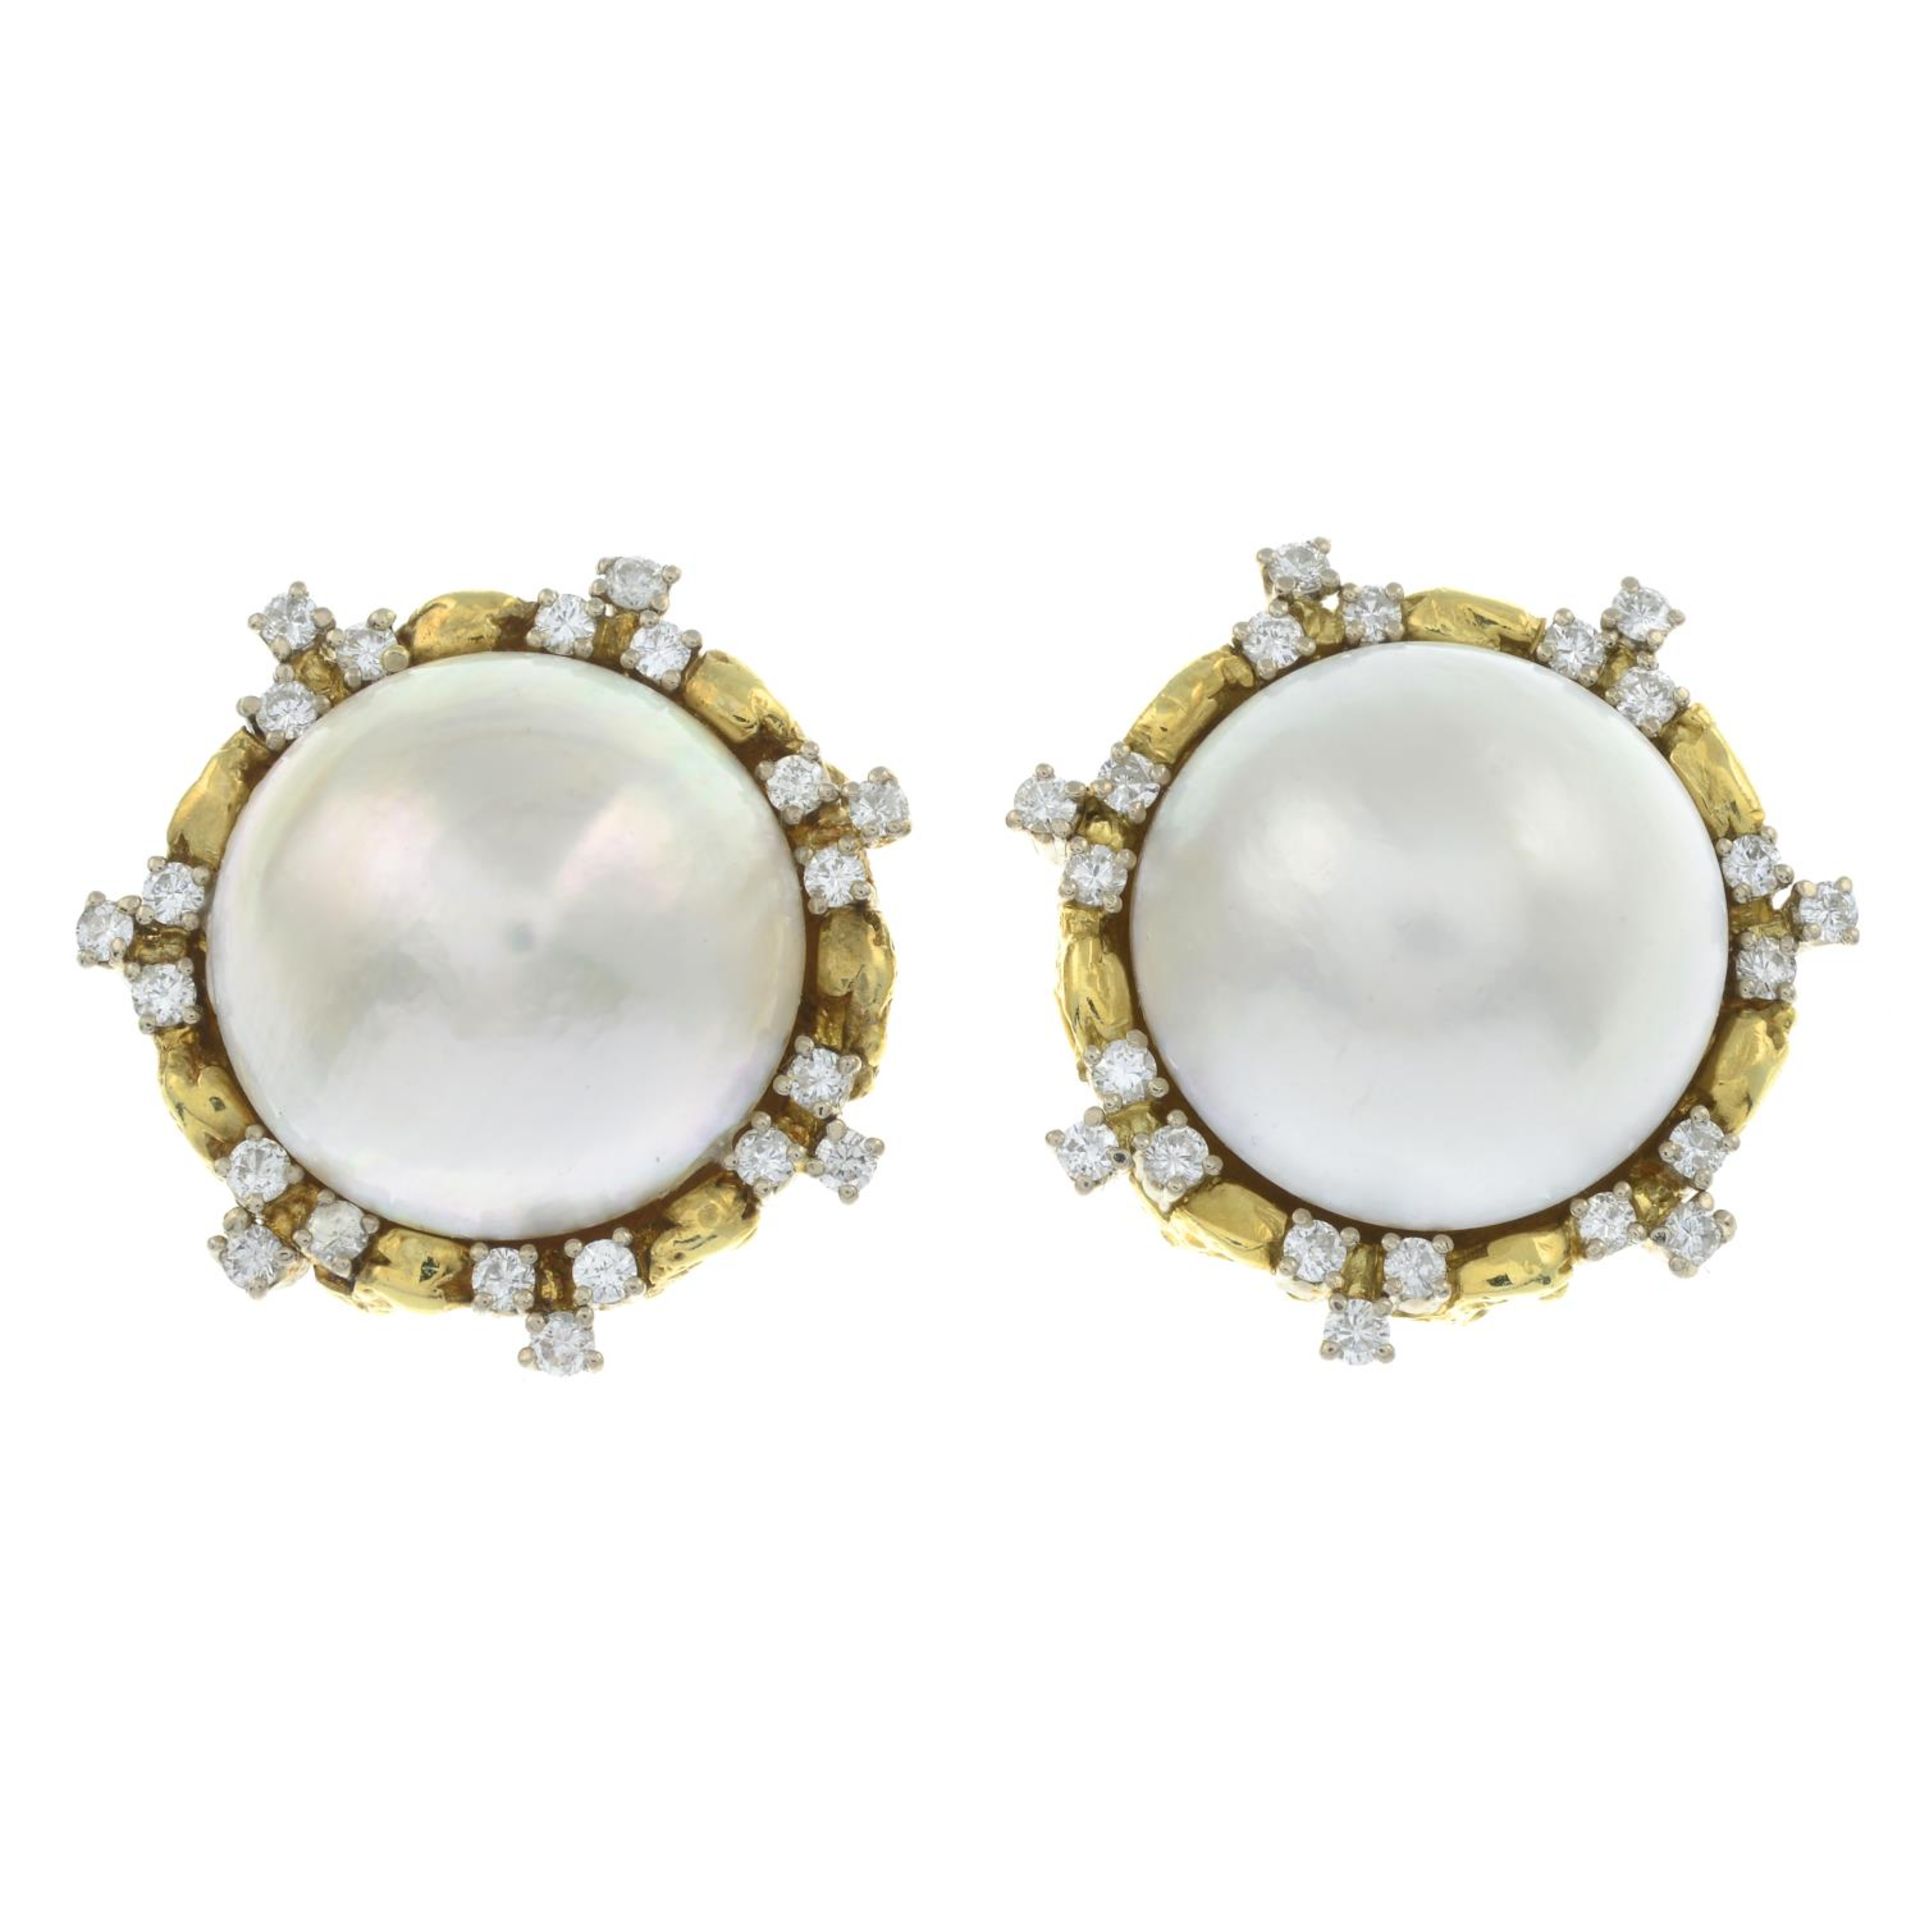 A pair of mabé pearl and diamond earrings. - Image 3 of 5